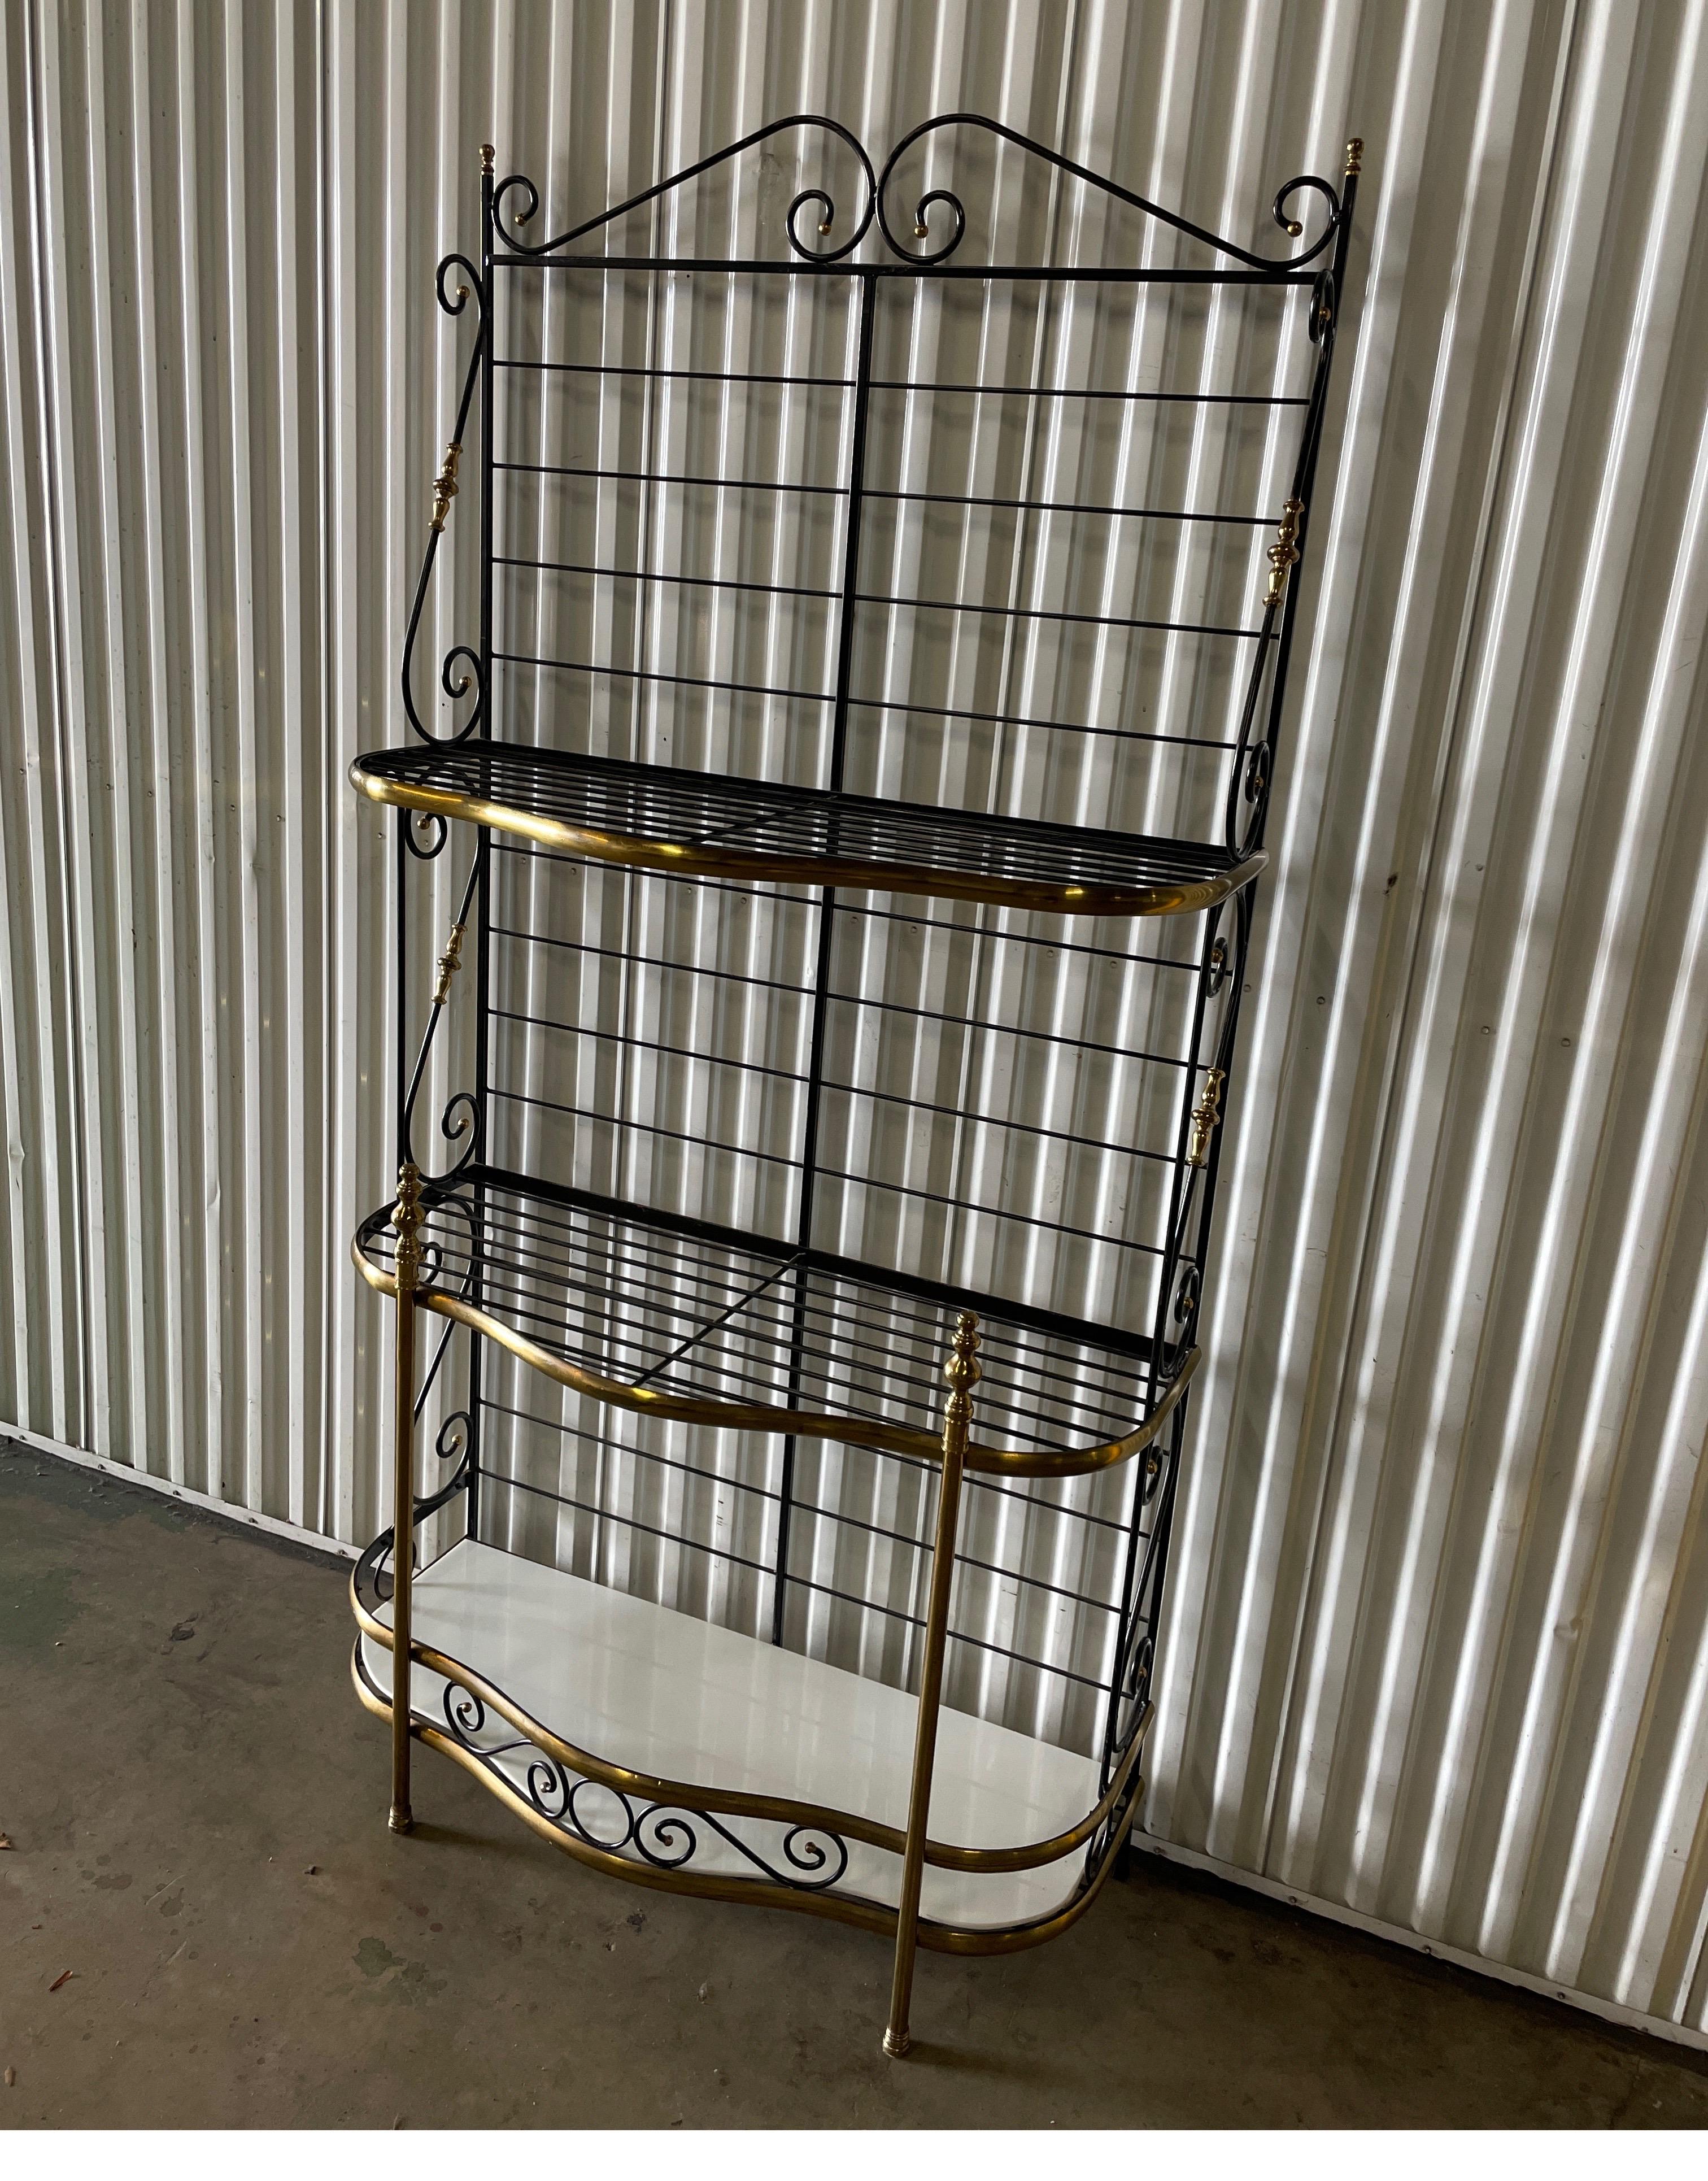 Vintage iron & brass three shelf Baker's rack with later added milk glass shelves.
The size is perfect for many locations.